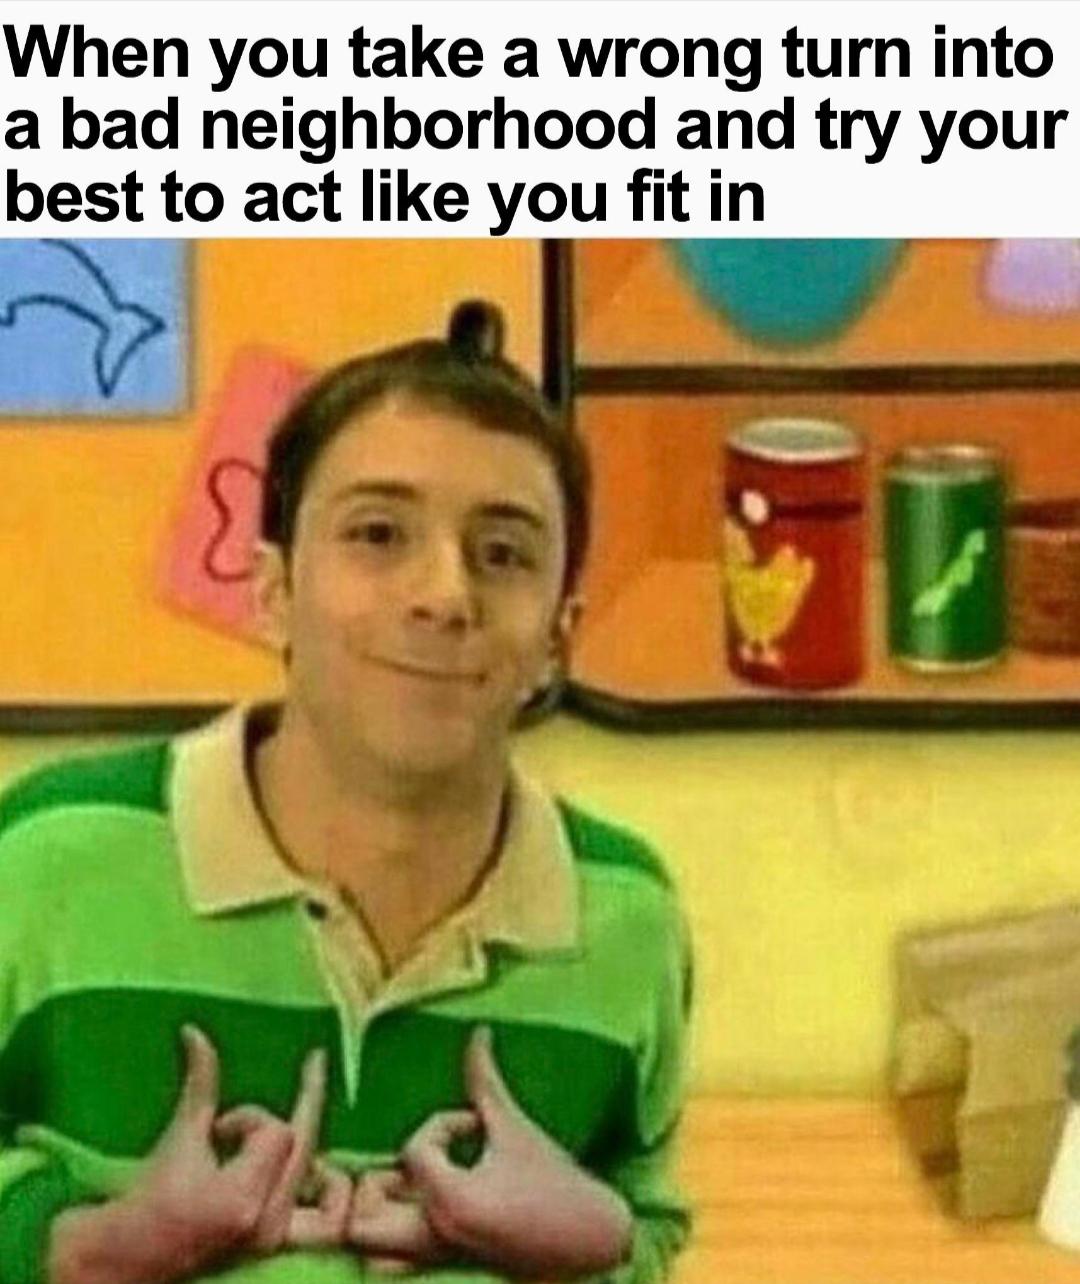 hood blues clues - When you take a wrong turn into a bad neighborhood and try your best to act you fit in